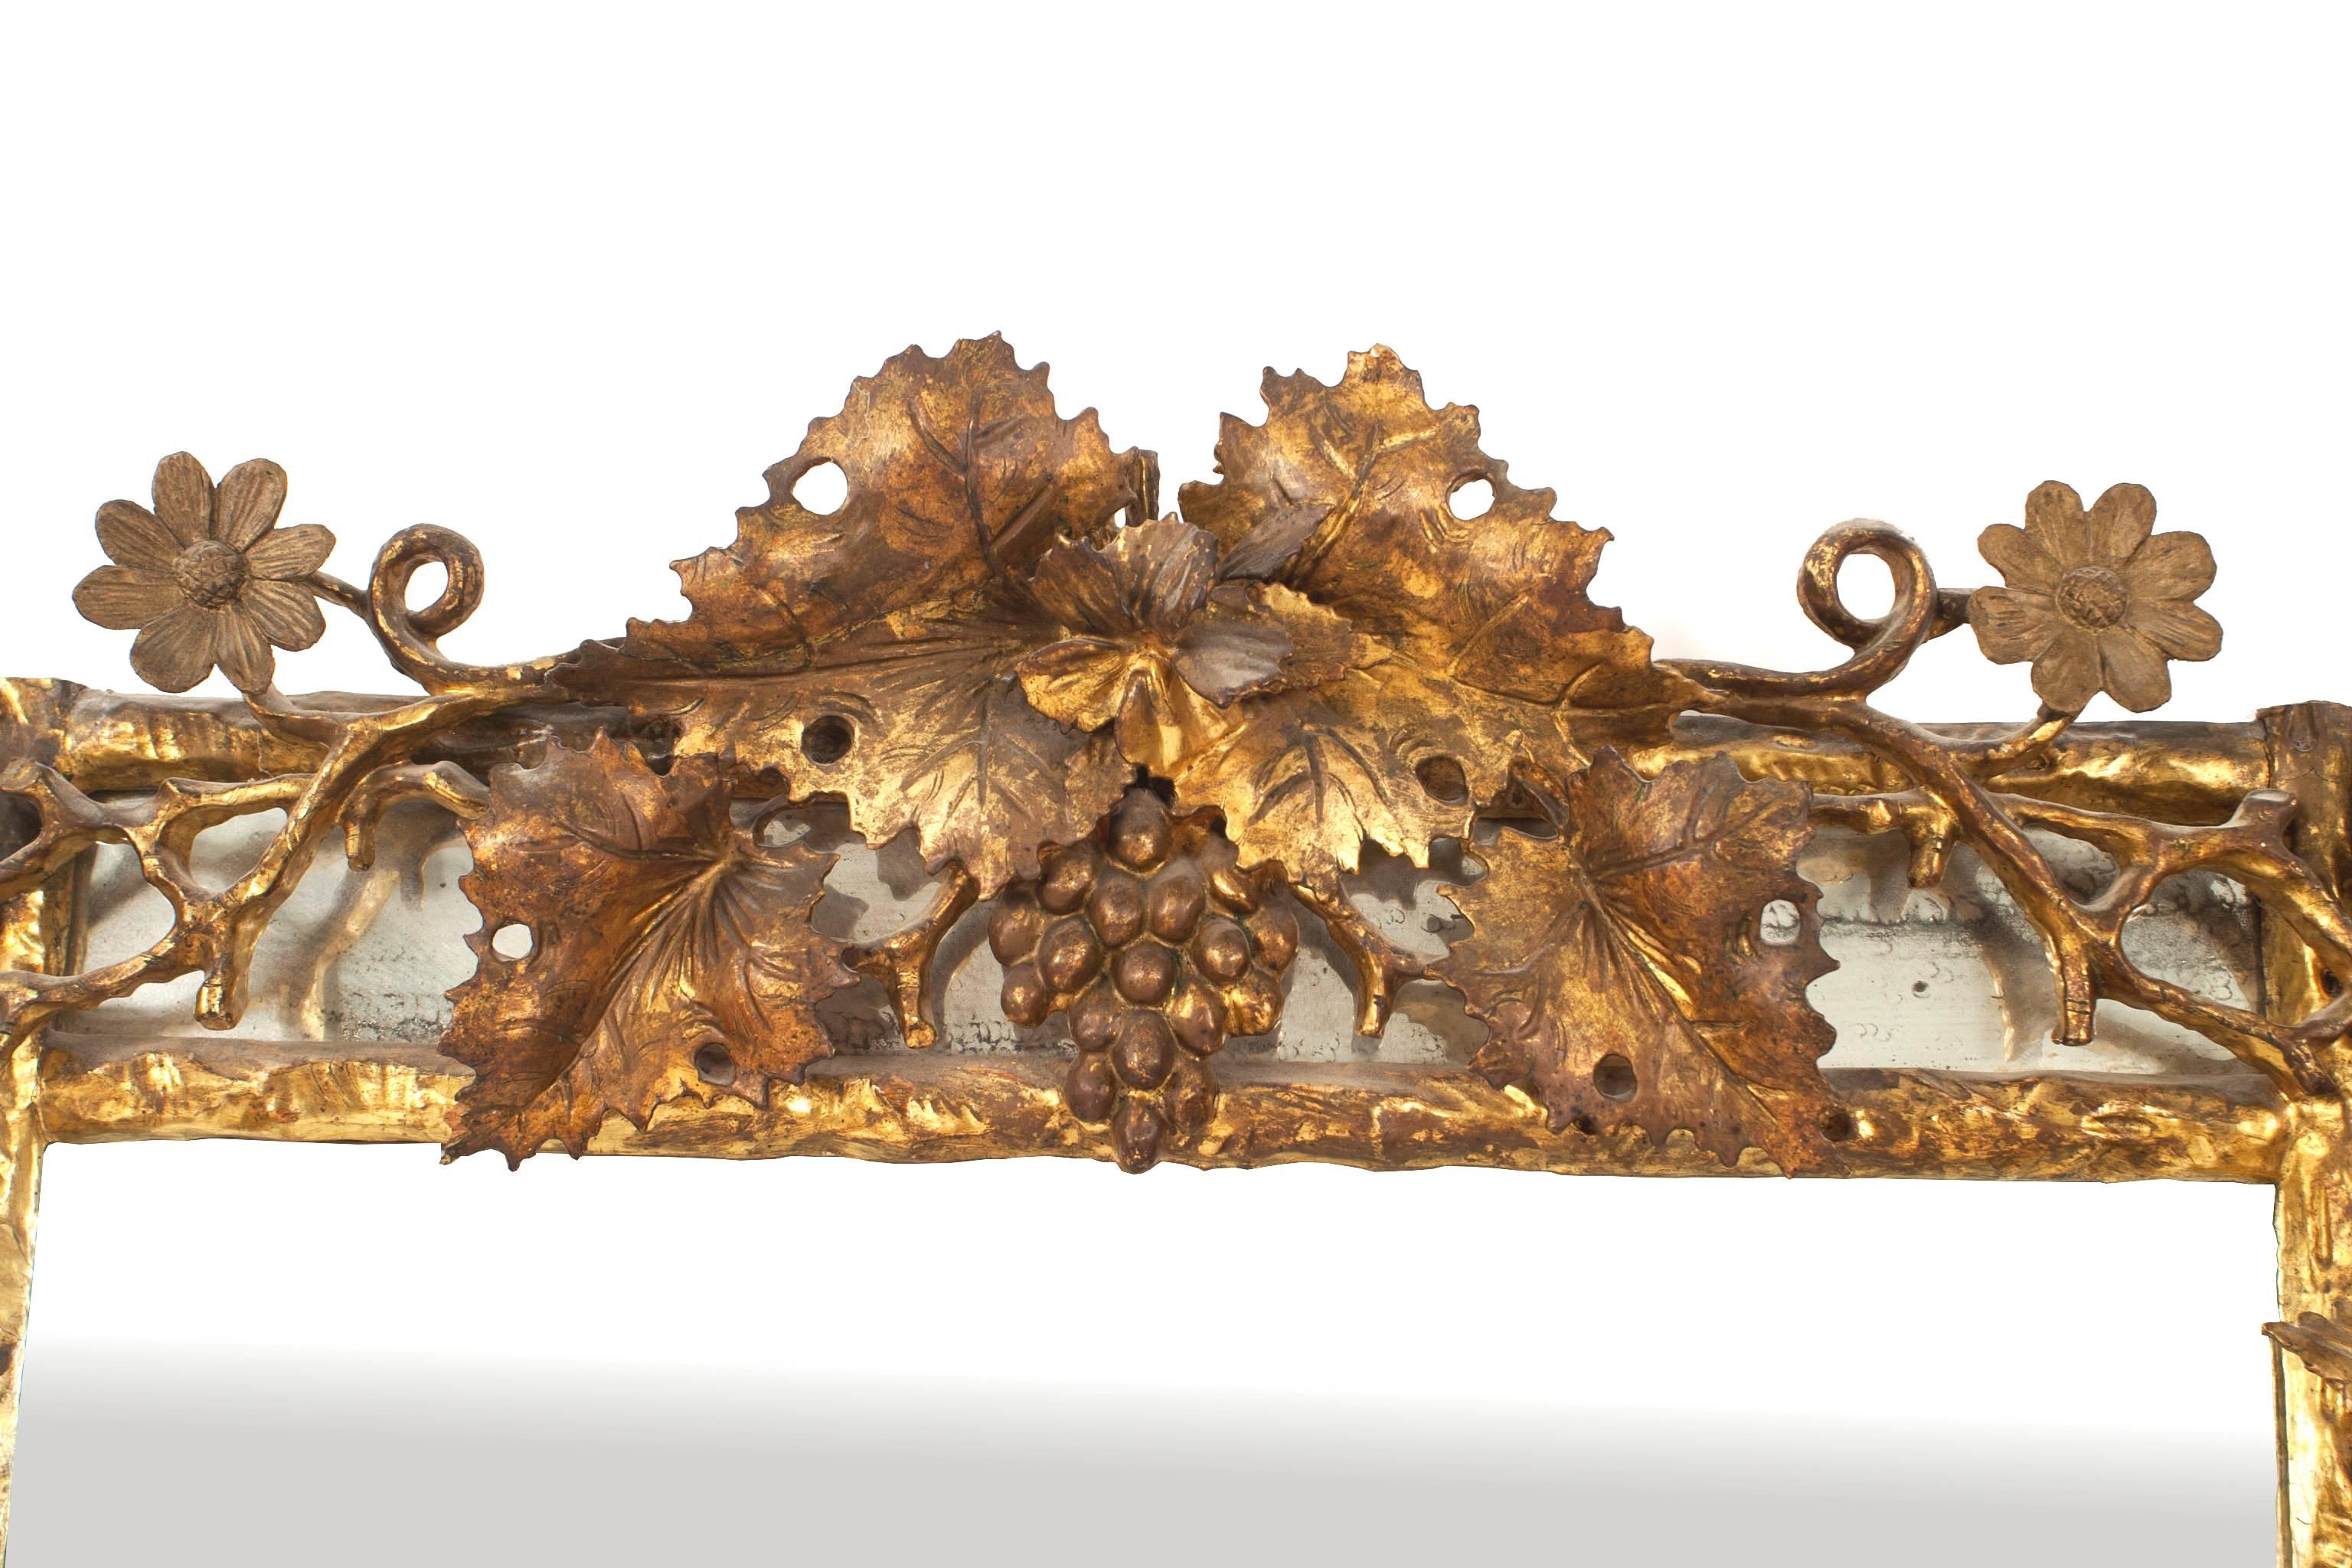 Italian neoclassic (18th-19th century) gilt rectangular wall mirror with a rustic filigree floral design frame.
     